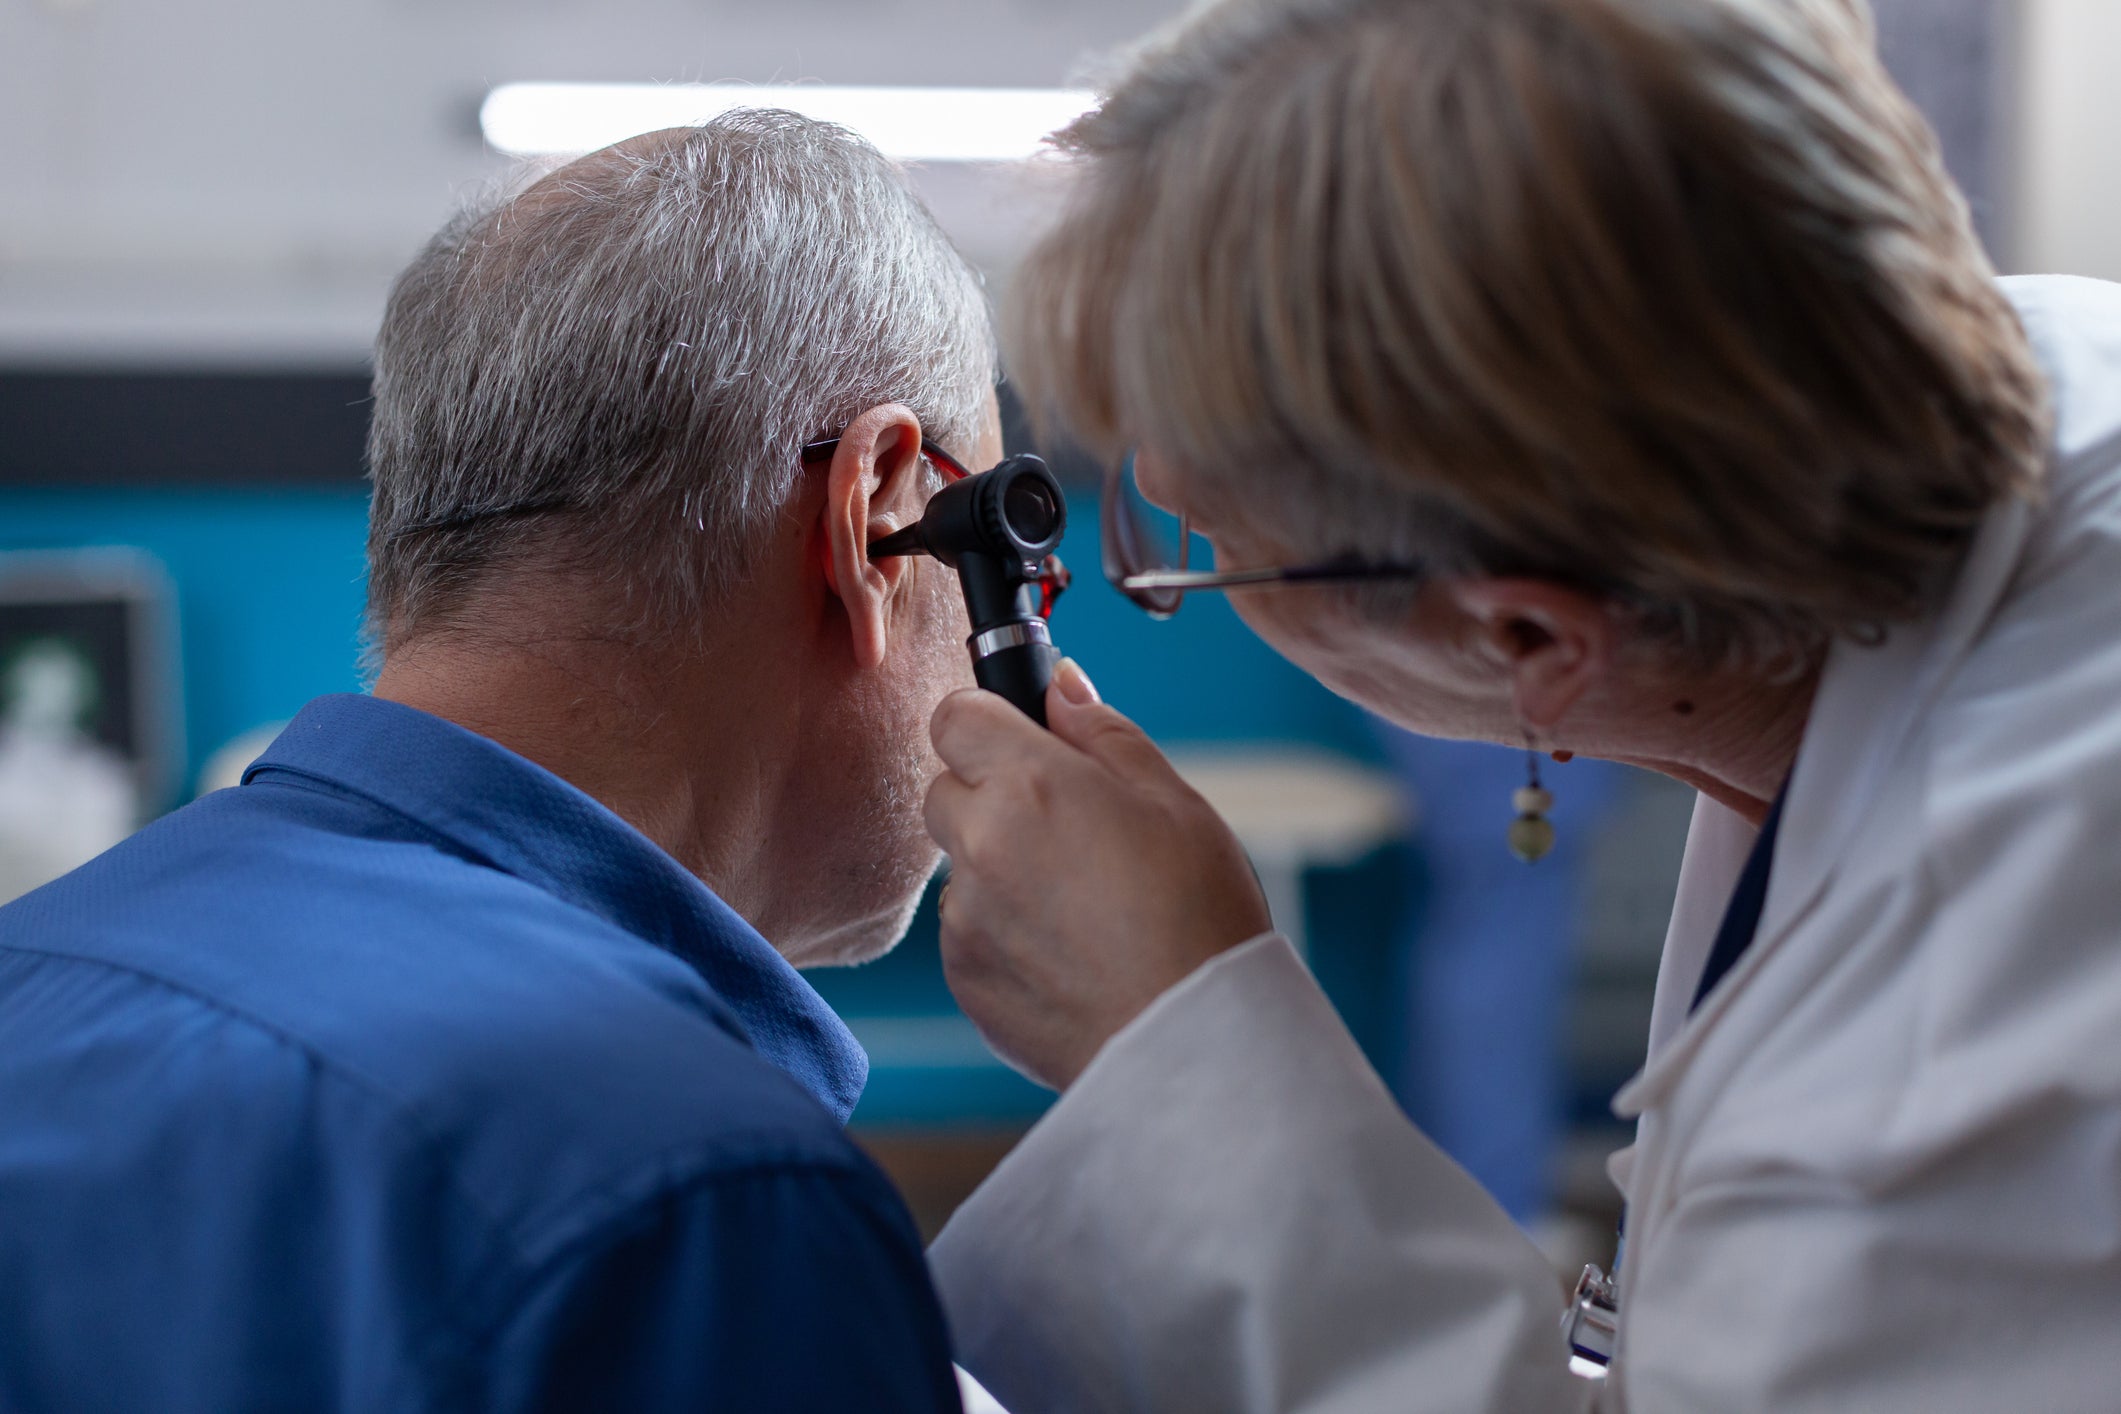 A close up of an older man having his ears checked at the clinic by a female doctor for a routine medical appointment to see if he requires hearing aids